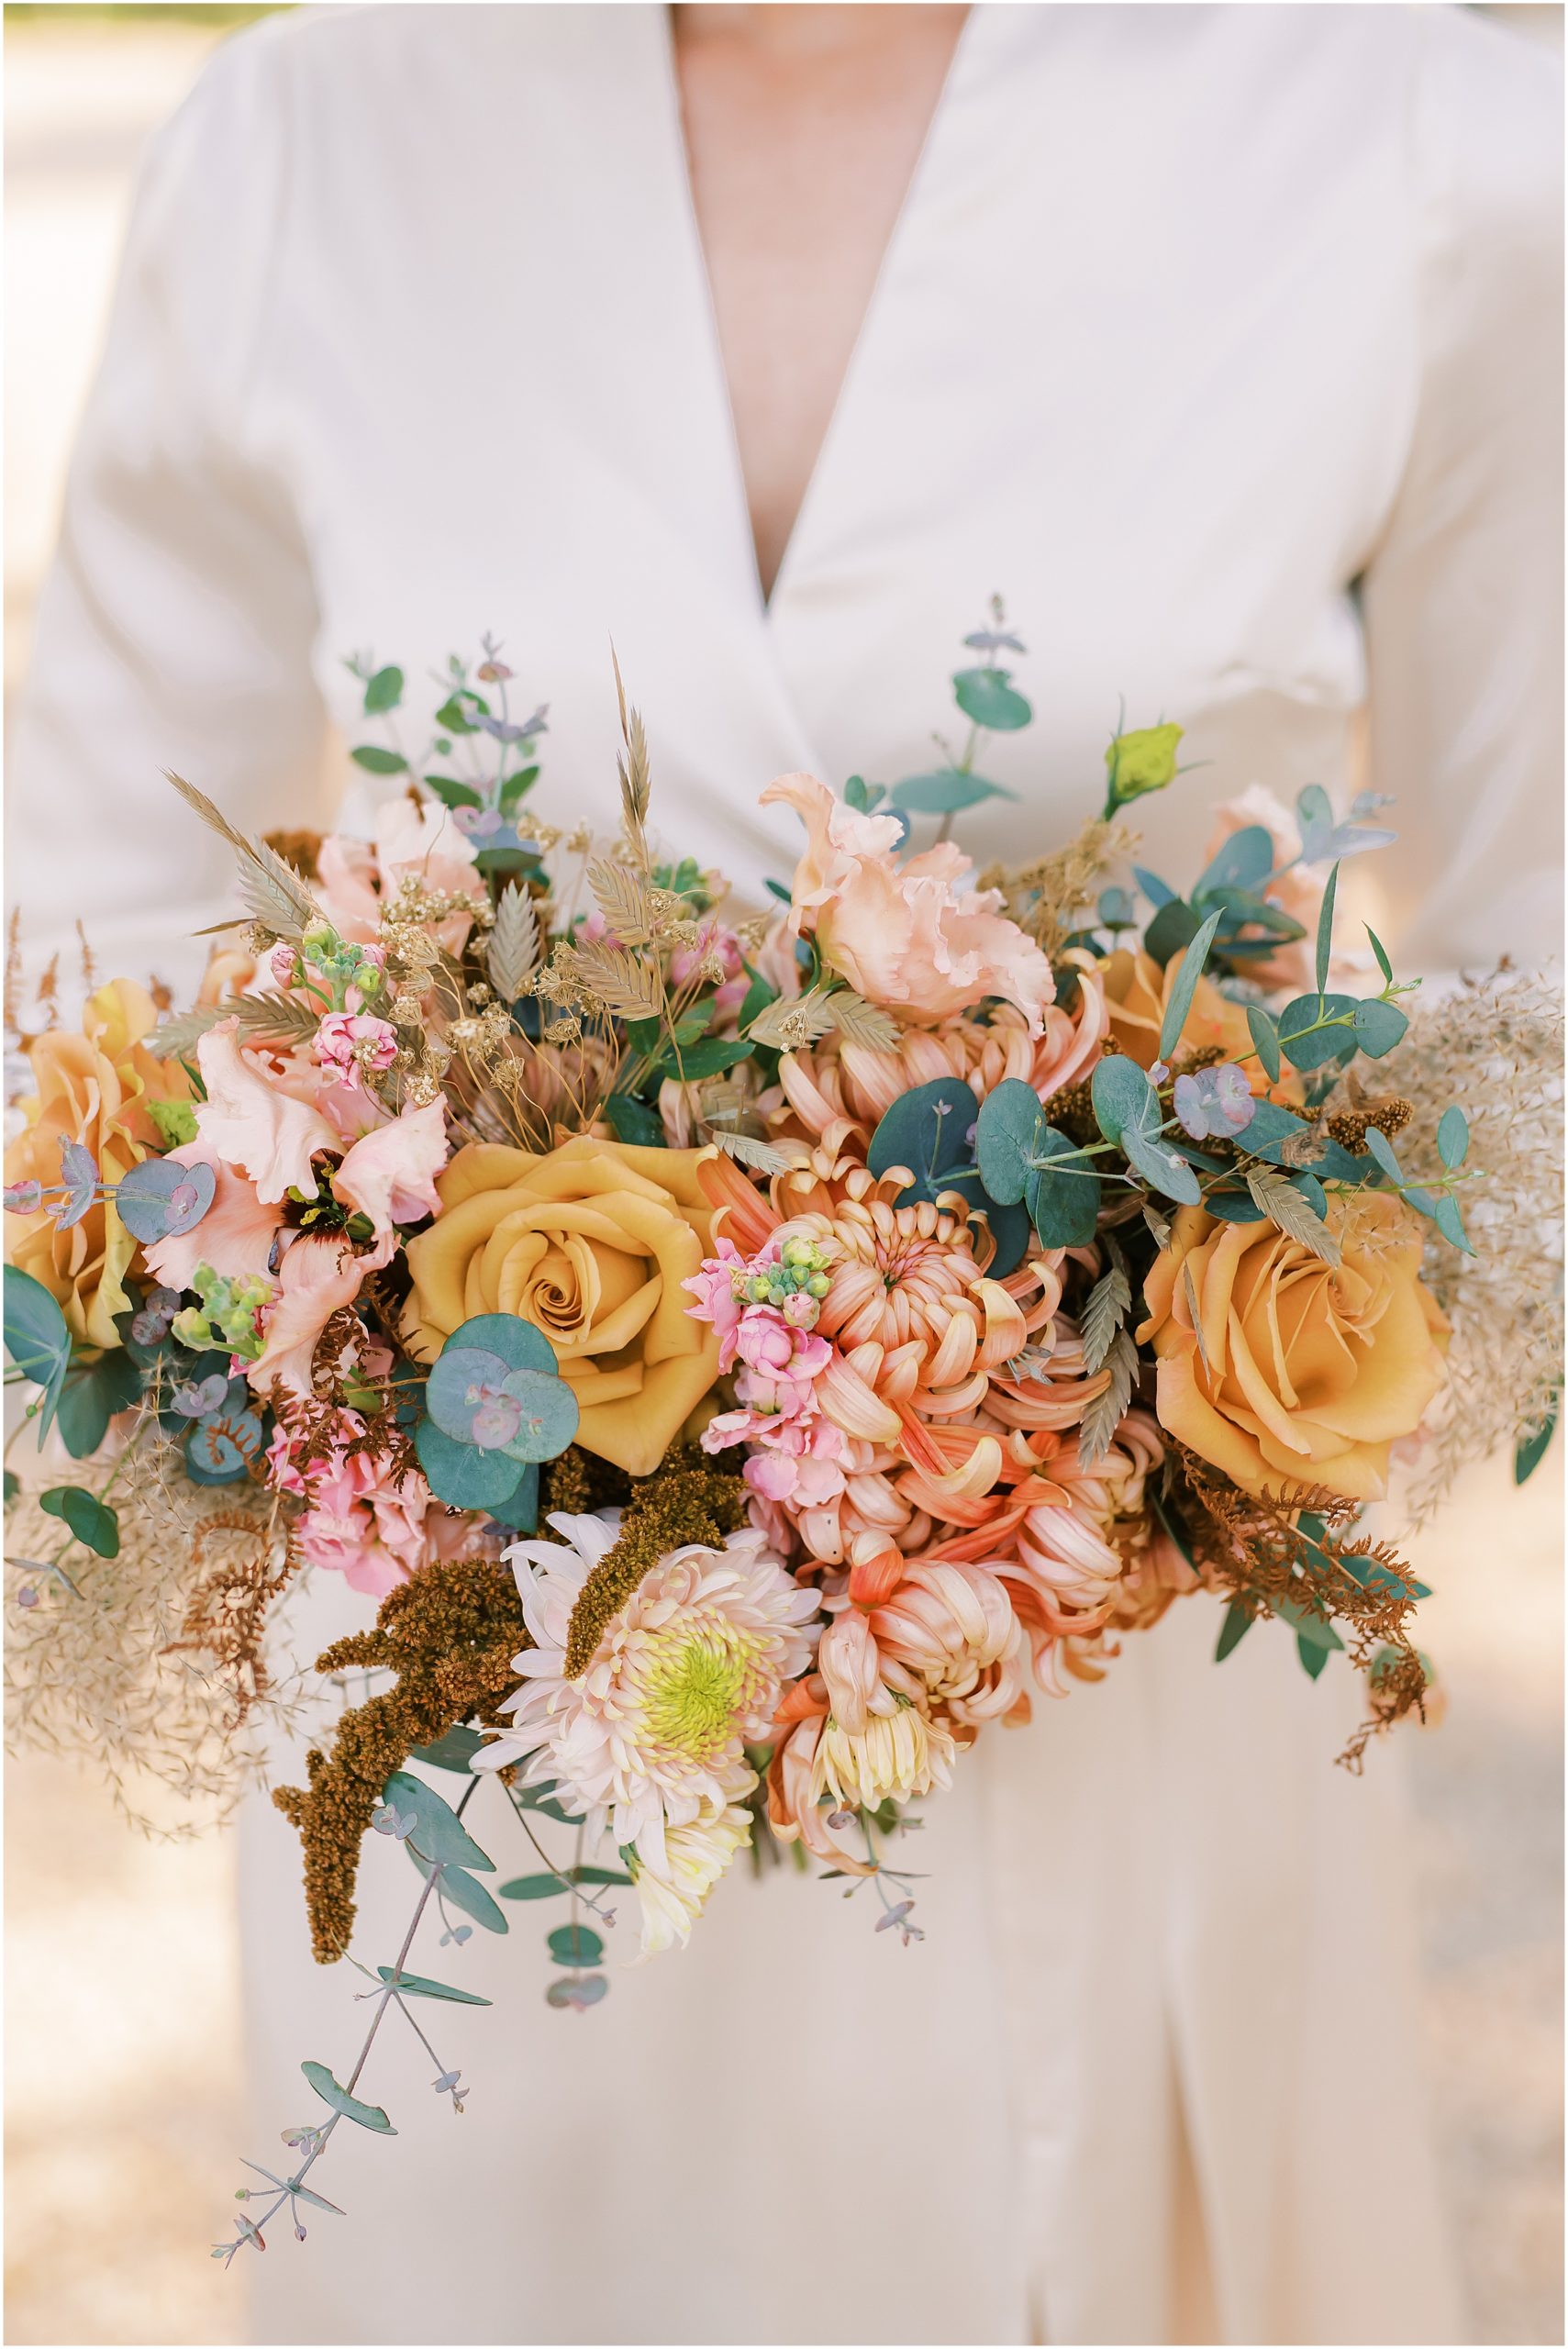 Rich and vibrant full wedding bouquet